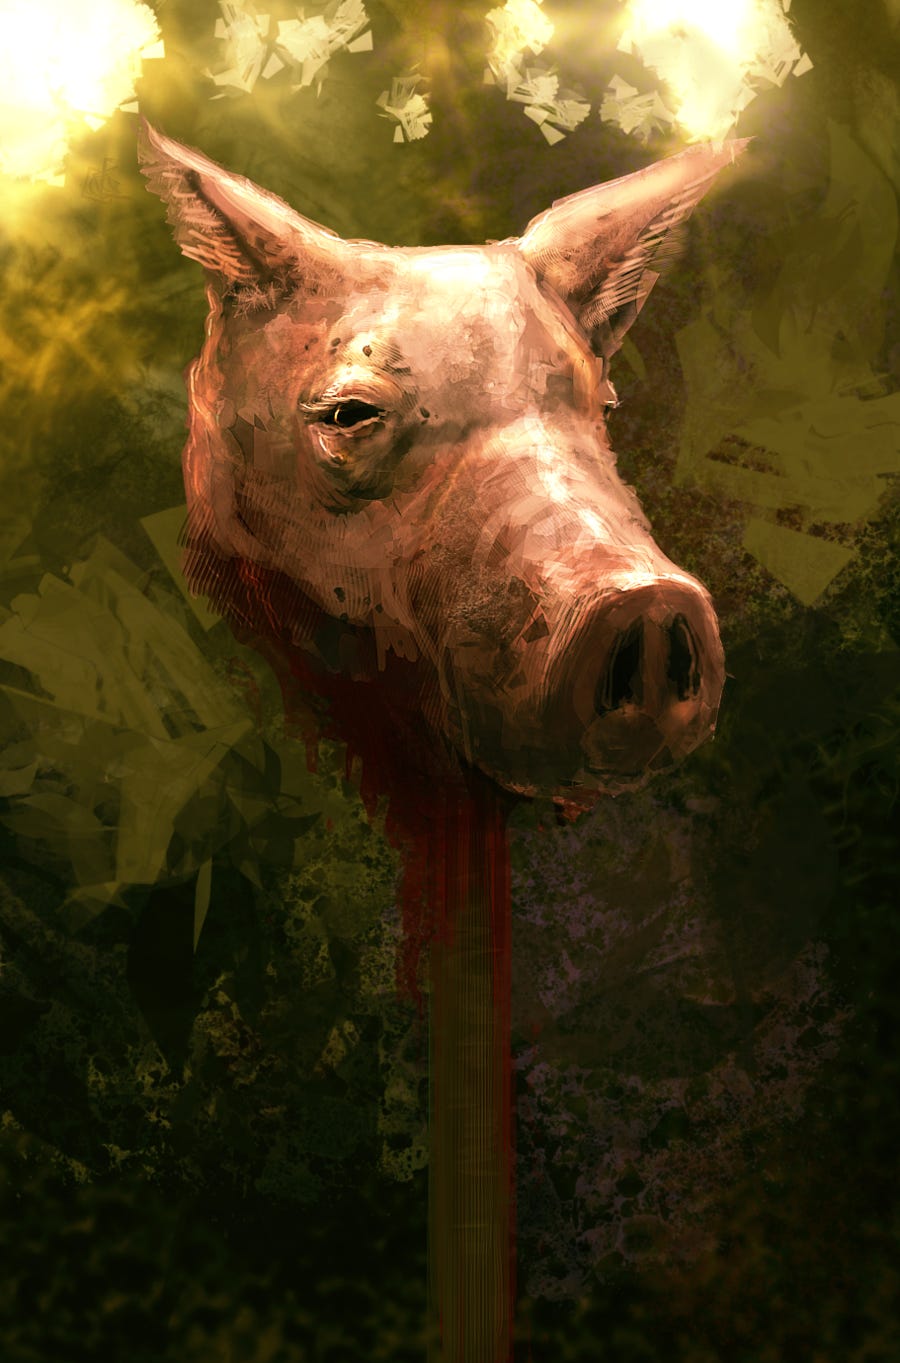 Pig heads do not belong on sticks....and that isn't the only misplaced stick in the book, if you know what I mean.